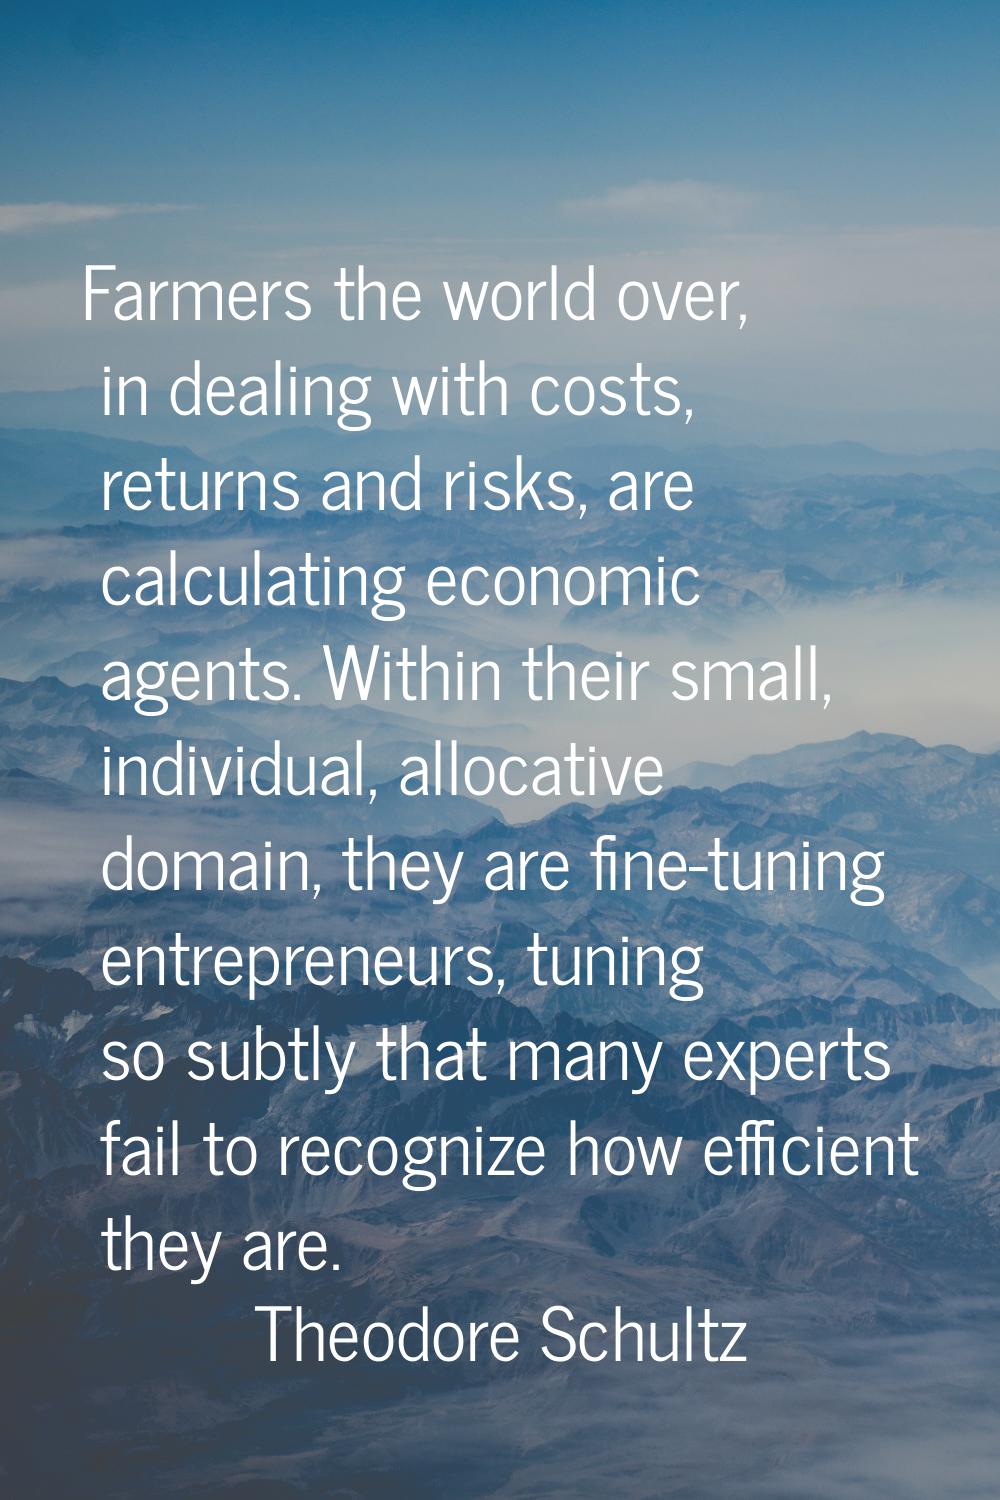 Farmers the world over, in dealing with costs, returns and risks, are calculating economic agents. 